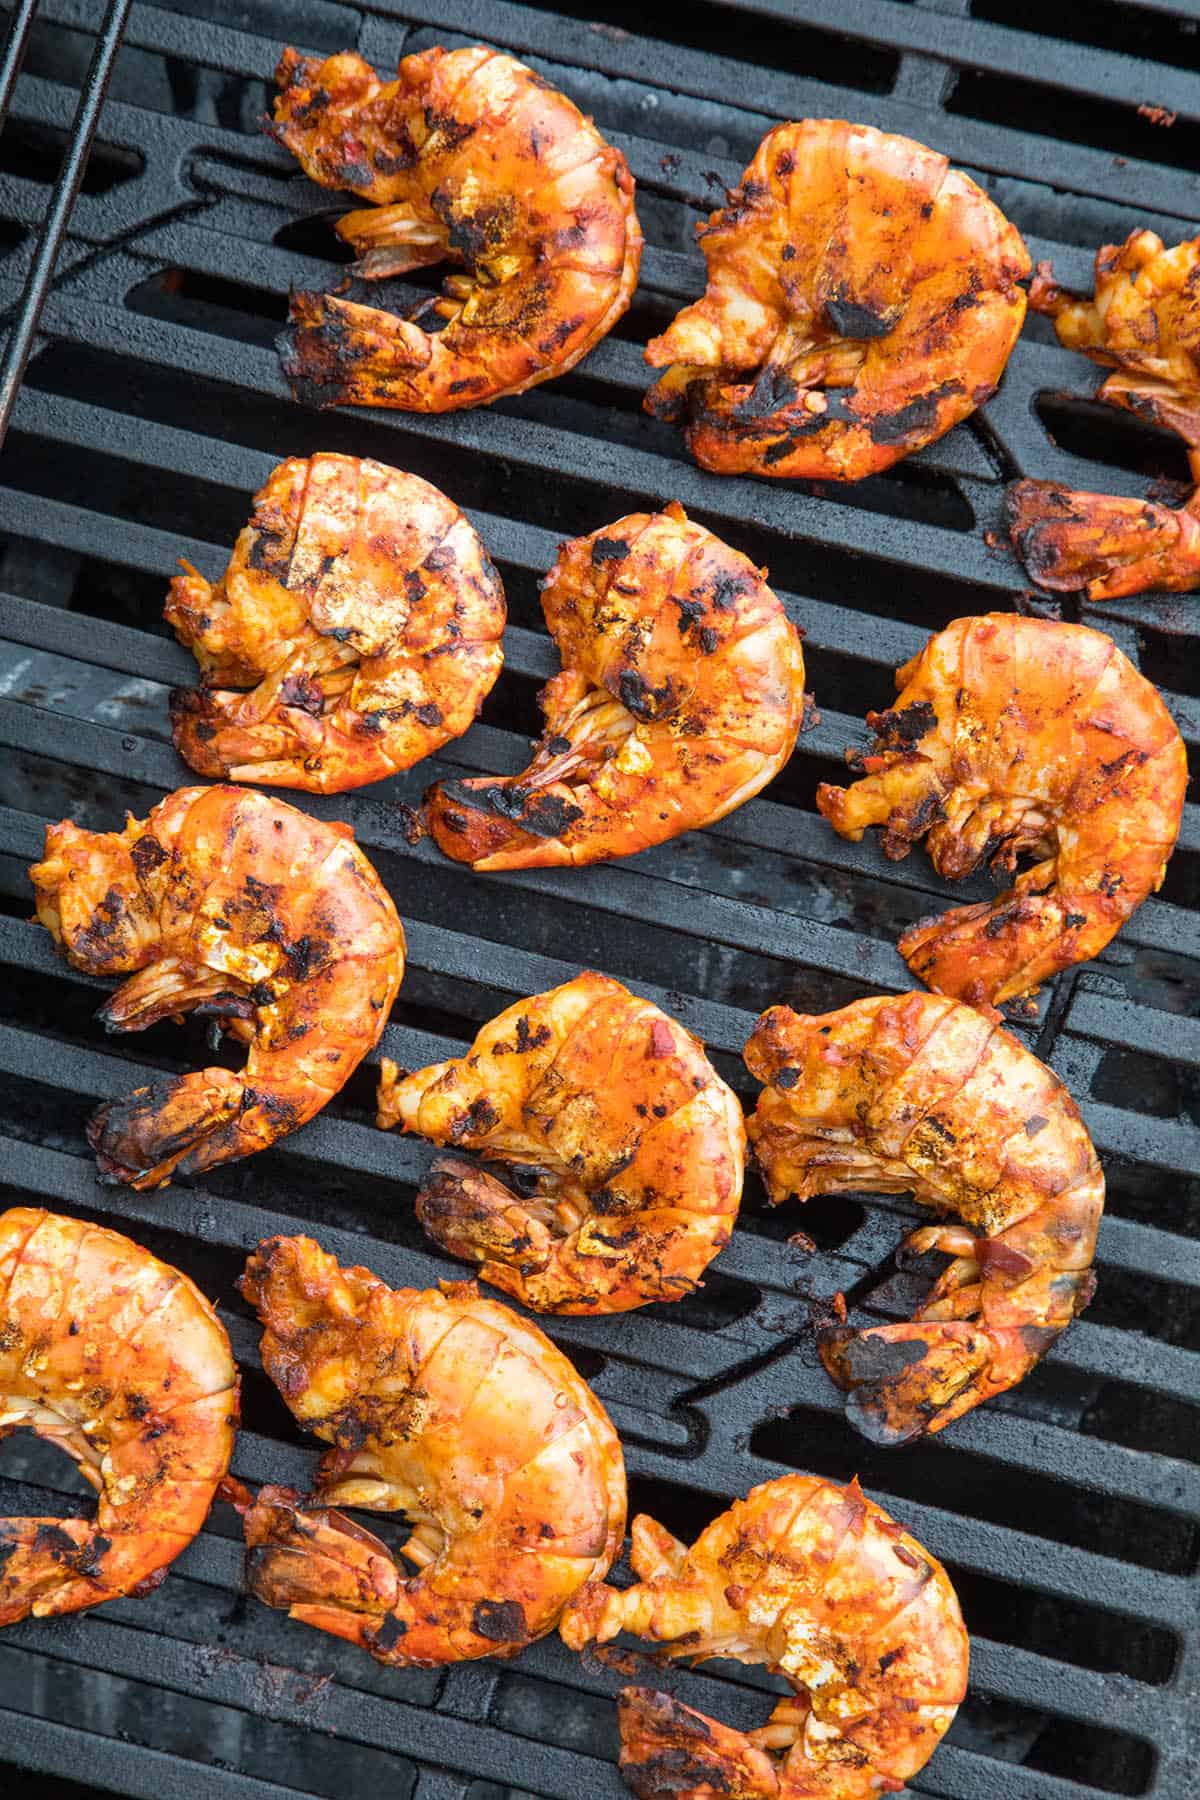 Colossal Grilled Shrimp on the Grill